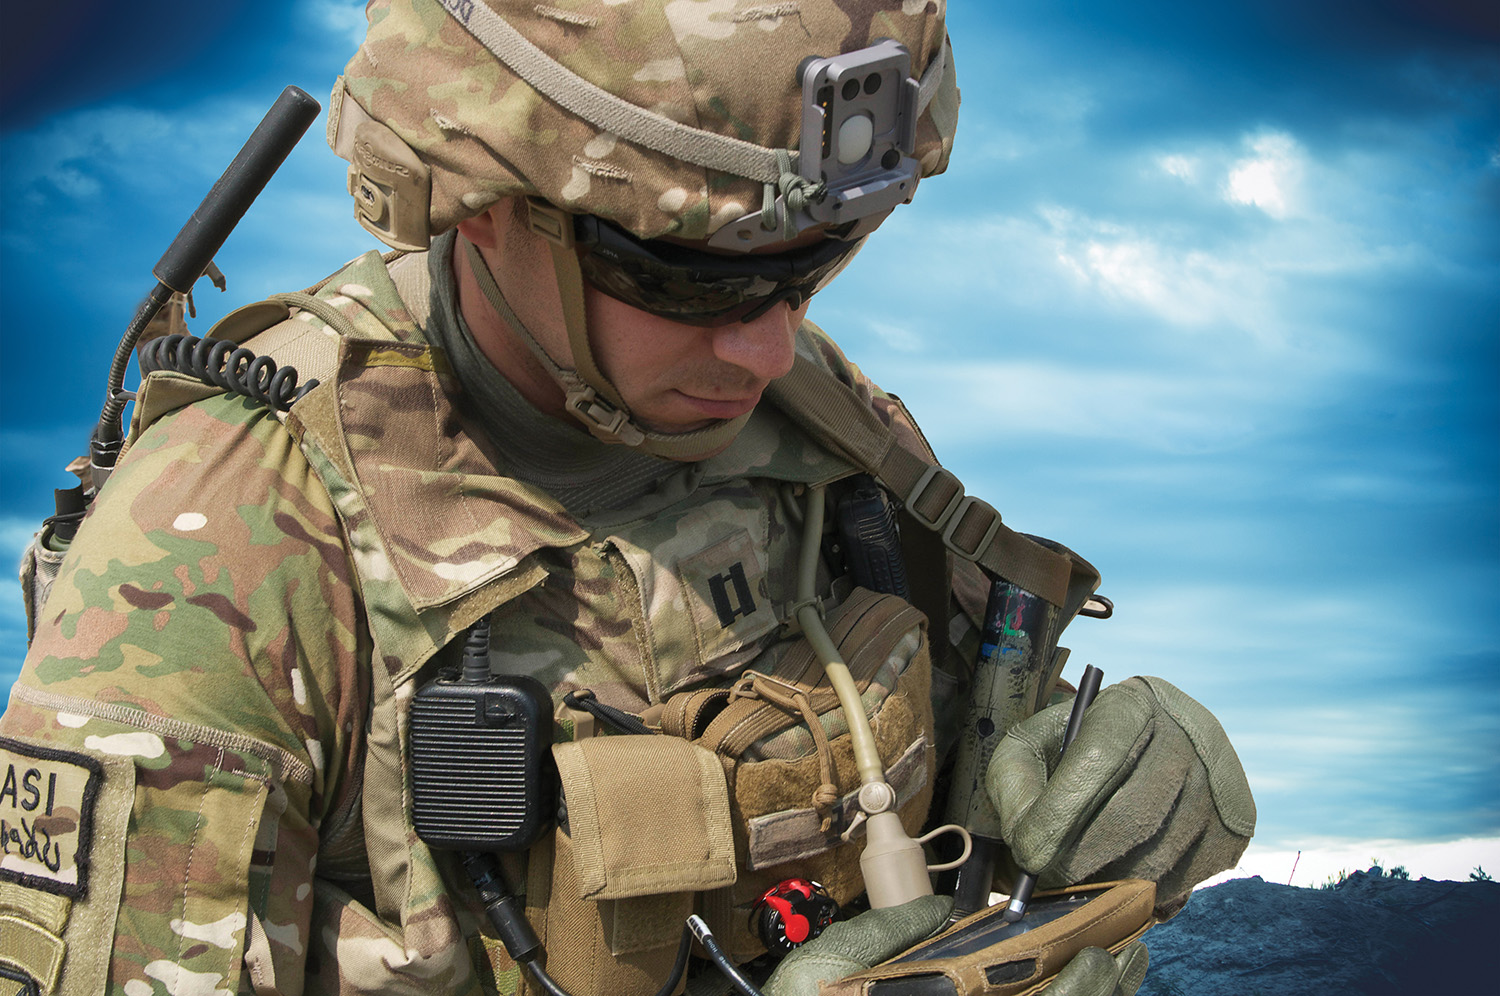 Soldier in the field using multiple electronic devices that require power.